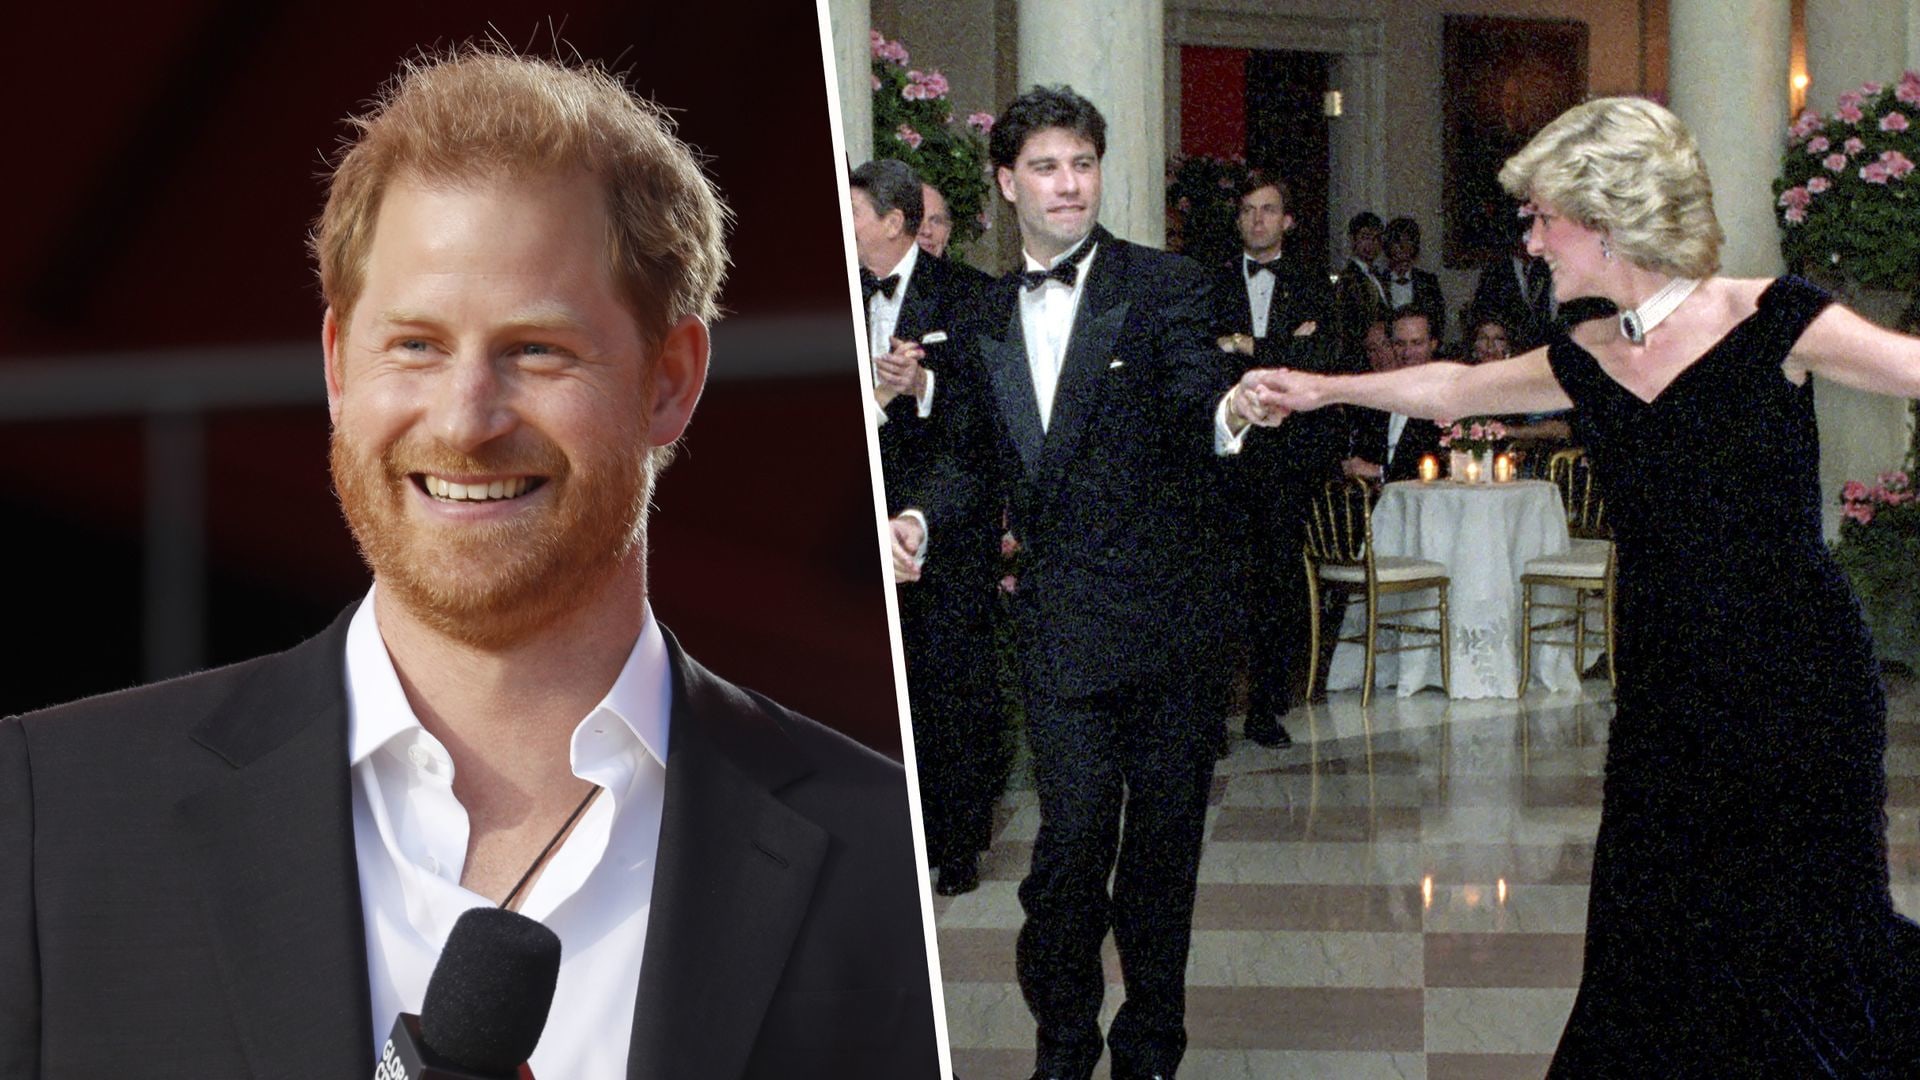 Prince Harry picture composed next to picture of John Travolta dancing with Princess Diana